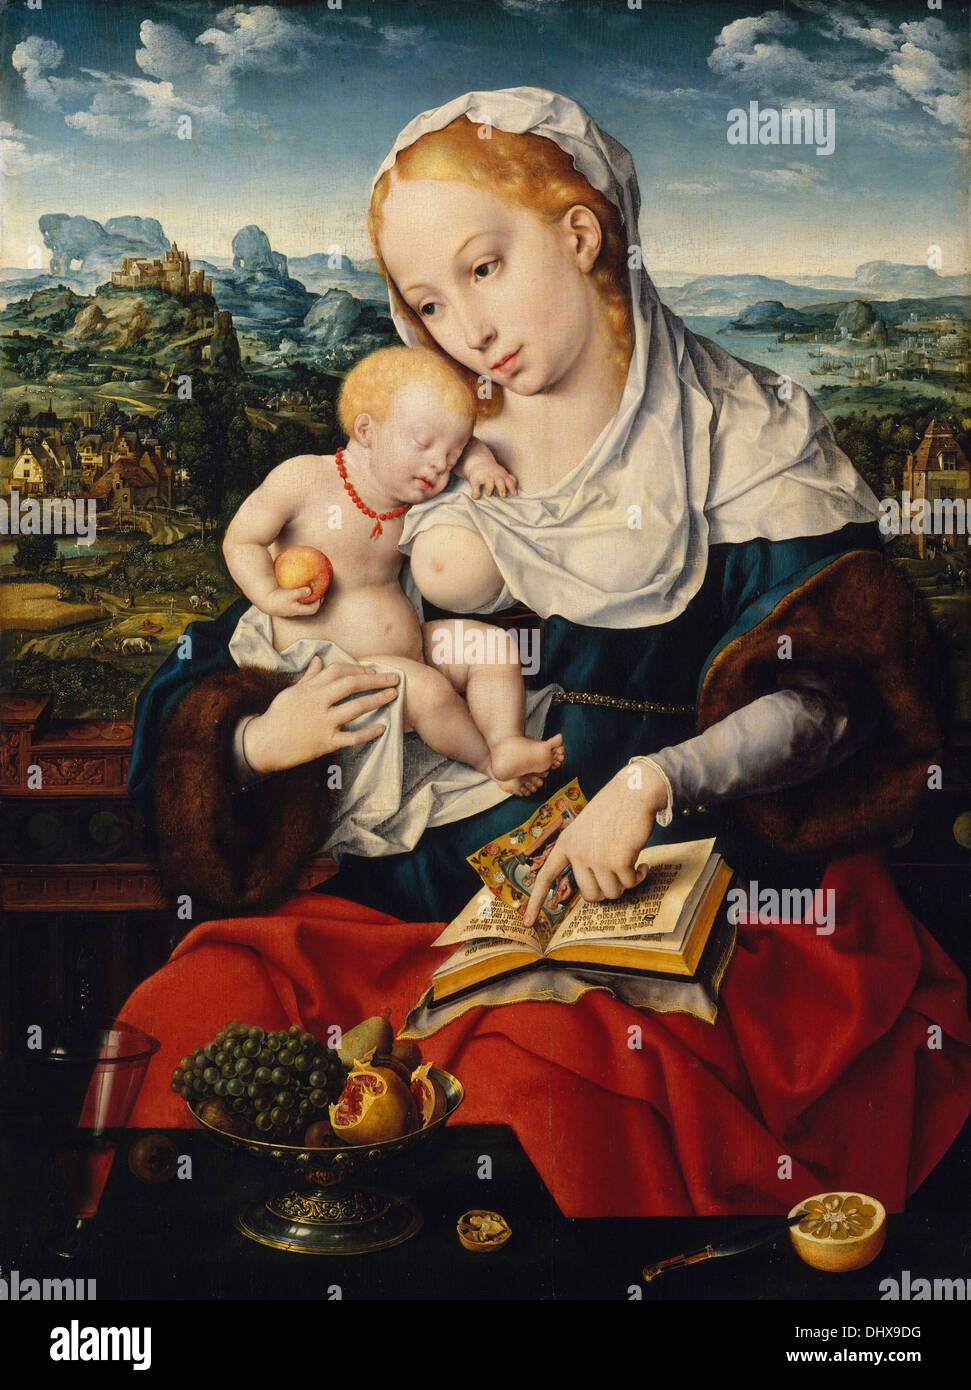 Virgin and Child  - by Joos van Cleve, 1525 Stock Photo